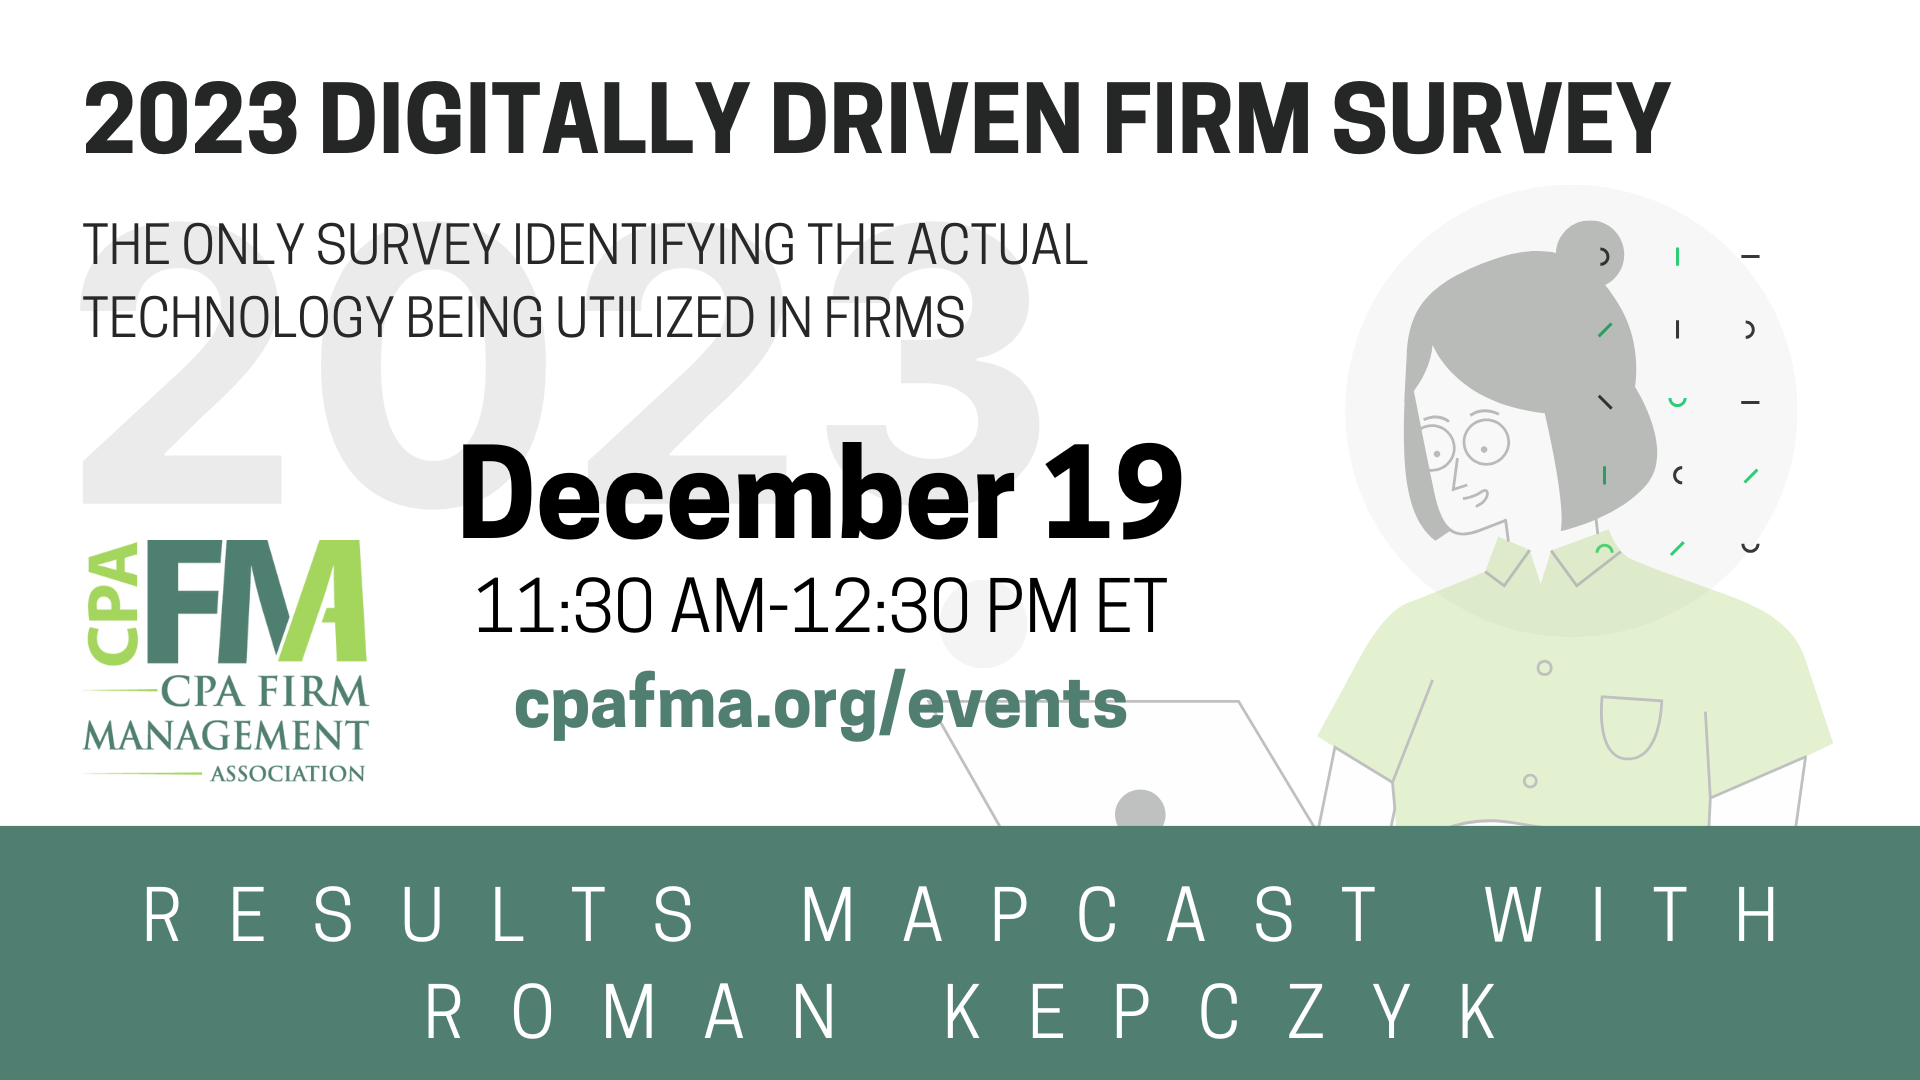 2023 Digitally Driven Firm Survey Results